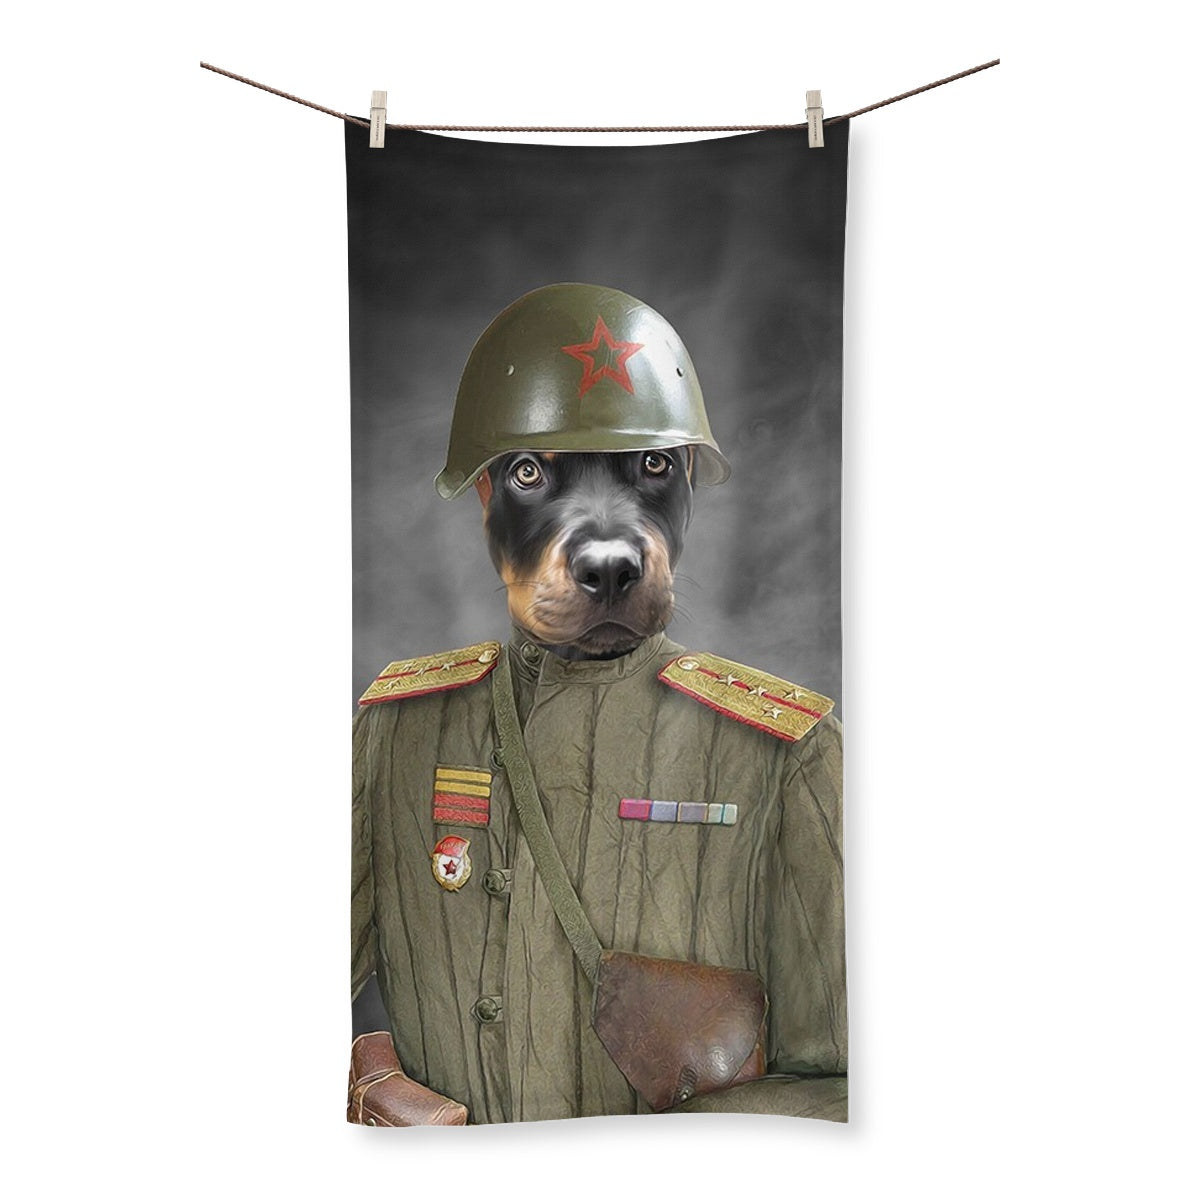 The World War Soldier: Custom Pet Towel - Paw and Glory - personalised dog towel, dog head towel, dog photo art, Anniversary gifts, Pet gifts, paw & glory